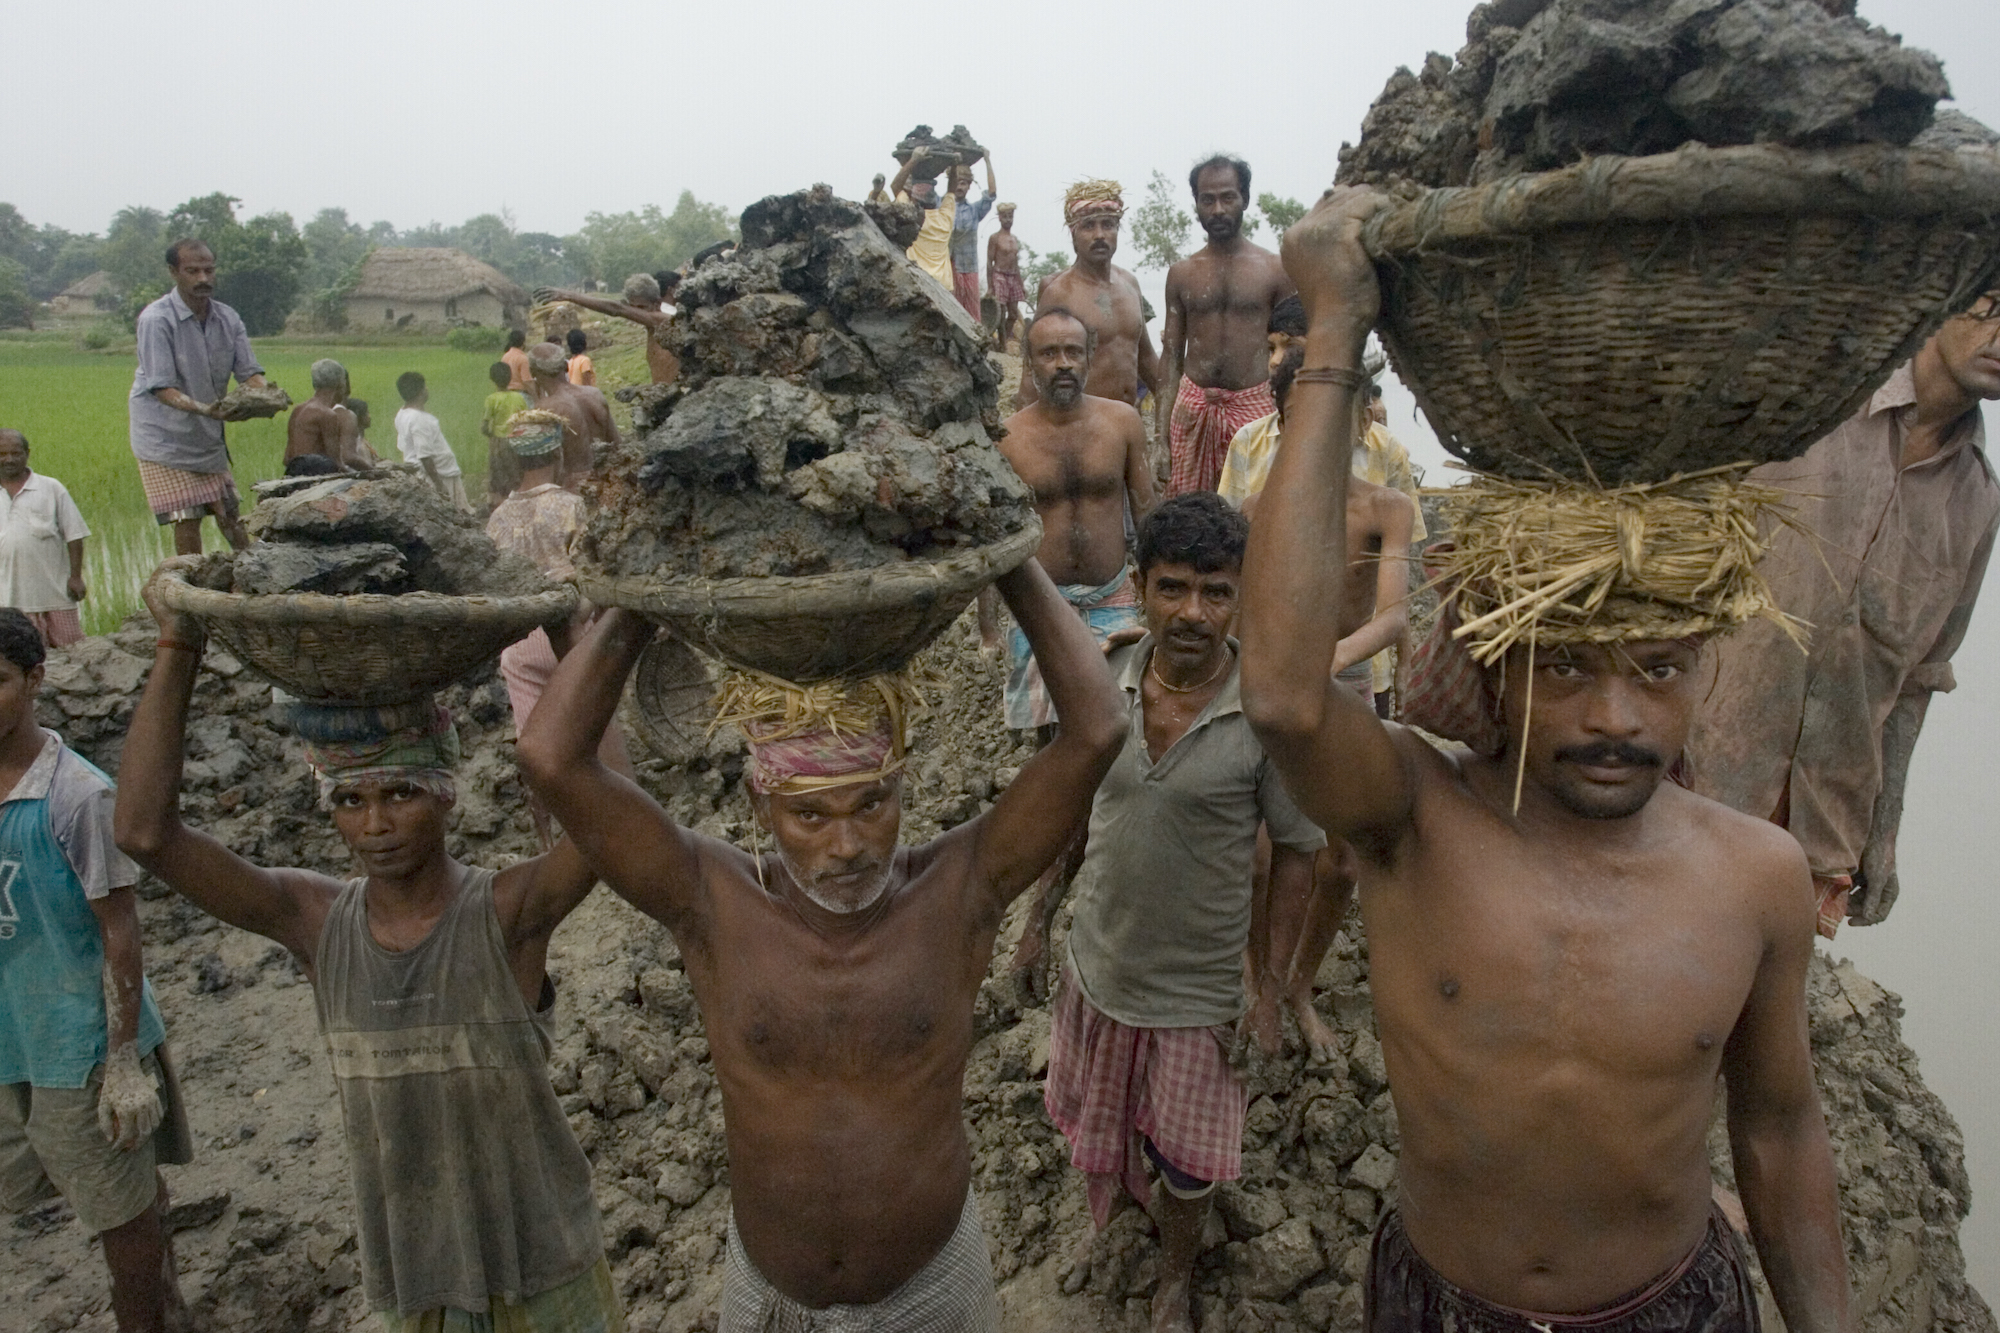 Workers Building a Dike to protect from sea level rise in the Sundarbans Region